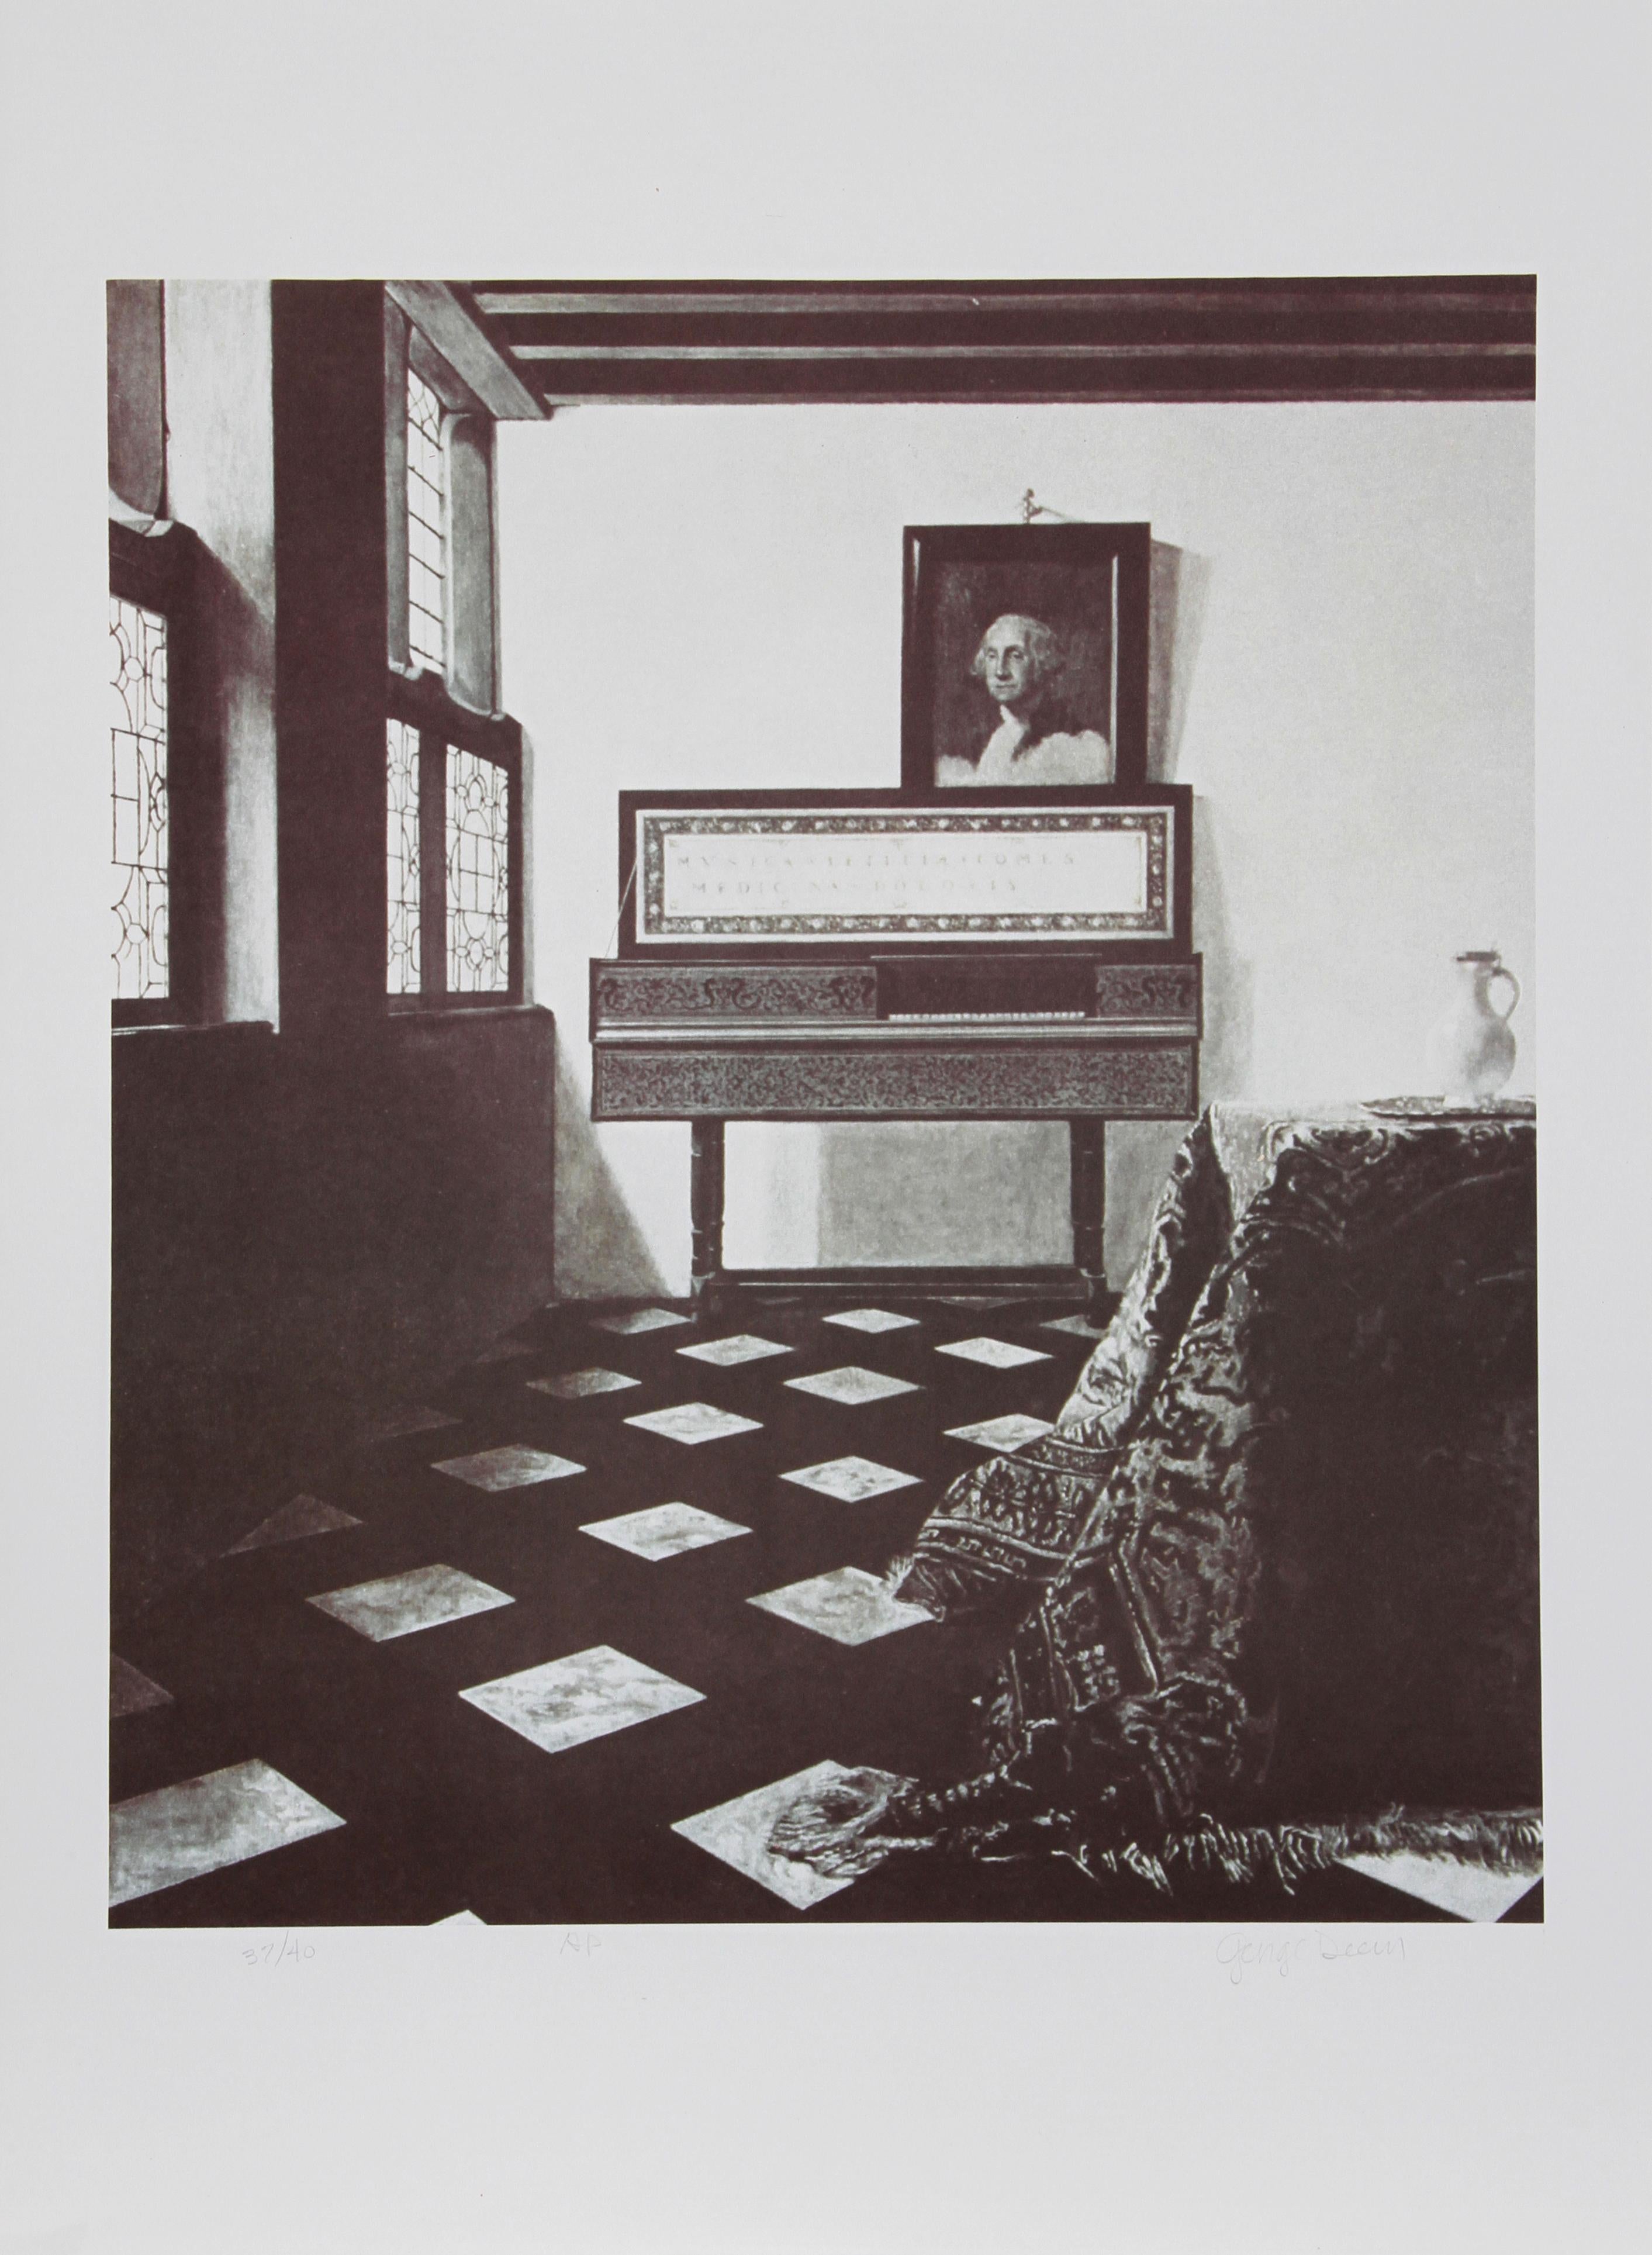 George Washington Vermeer
George Deem, American (1932–2008)
Date: 1978
Lithograph, signed and numbered in pencil
Edition of AP 40
Image Size: 22 x 19 inches
Size: 30 in. x 22 in. (76.2 cm x 55.88 cm)